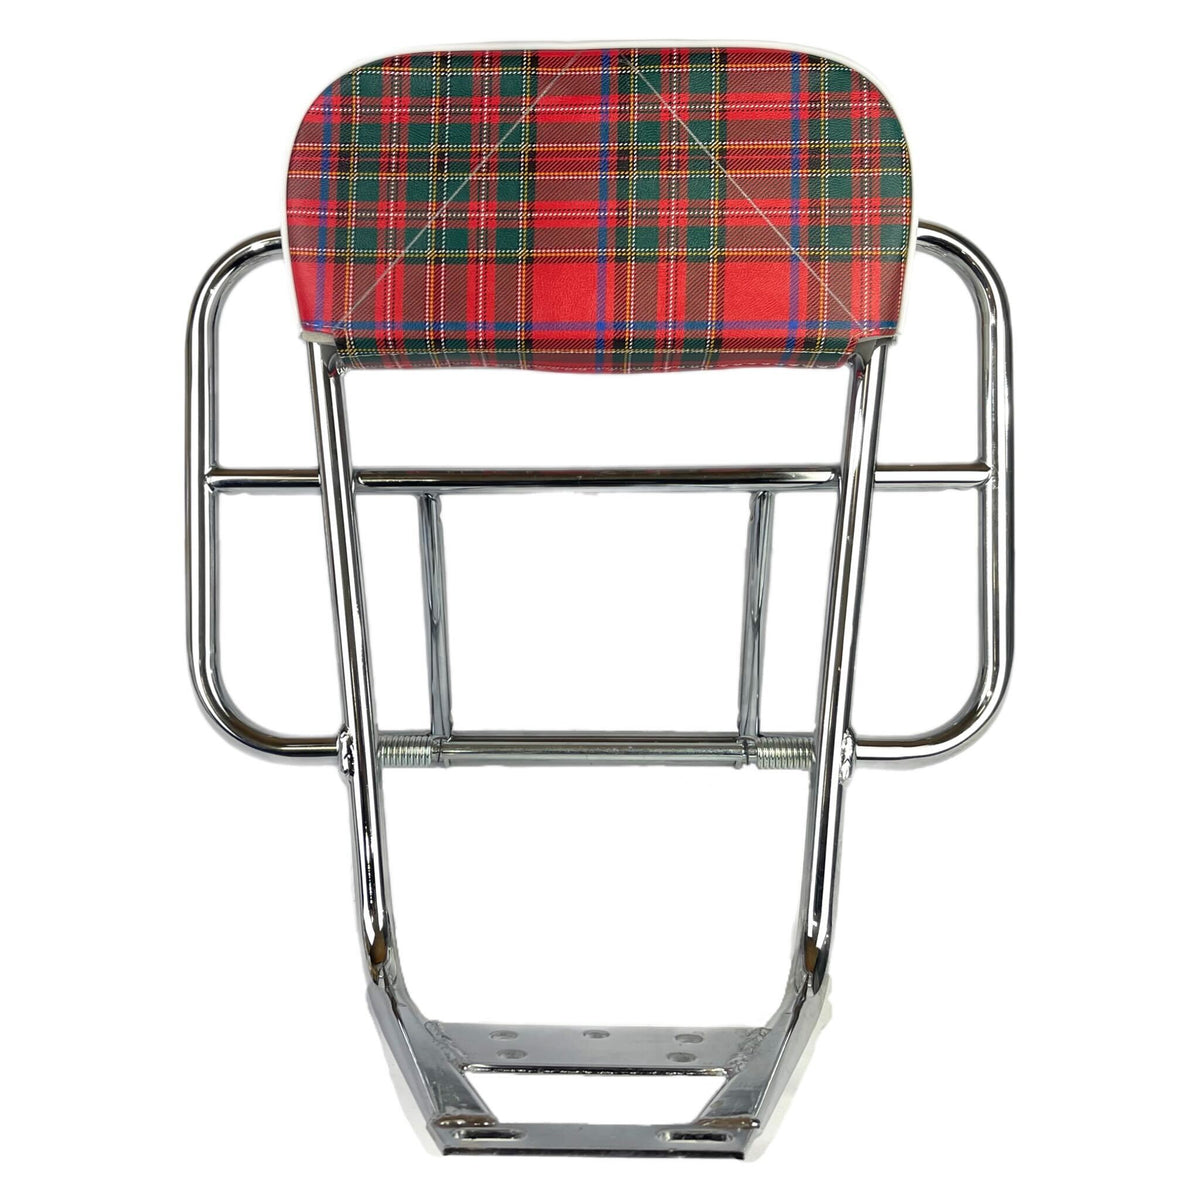 Vespa Lambretta Backrest Replacement Pad For Cuppini Carriers - Red & Green Tartan